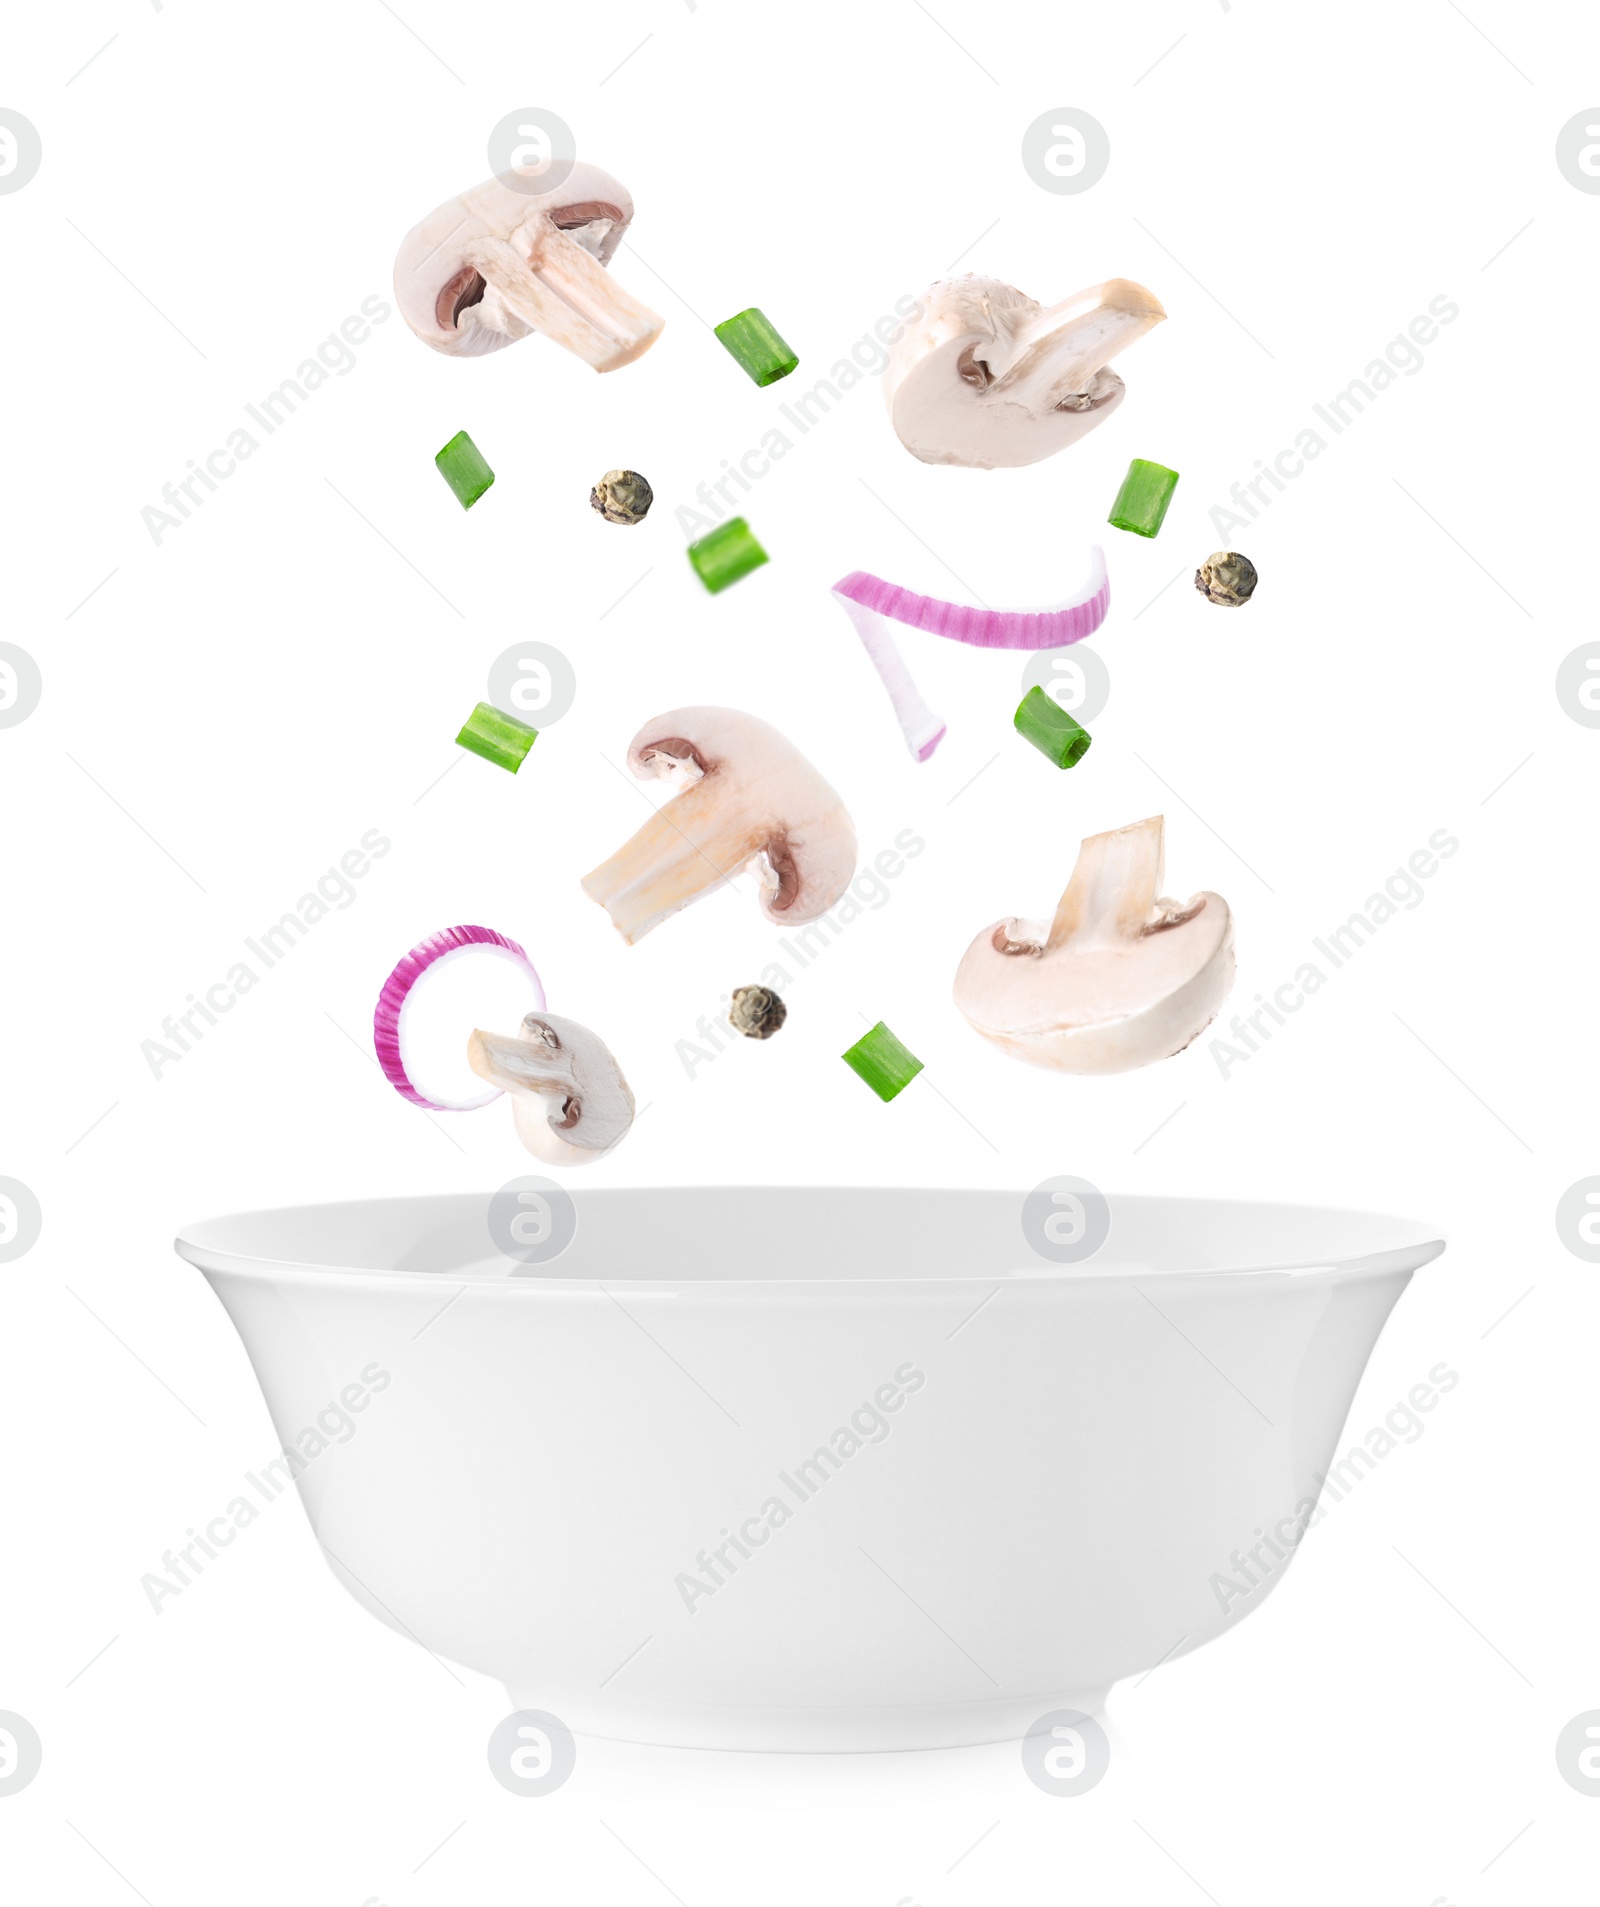 Image of Fresh mushrooms and other ingredients falling into bowl on white background